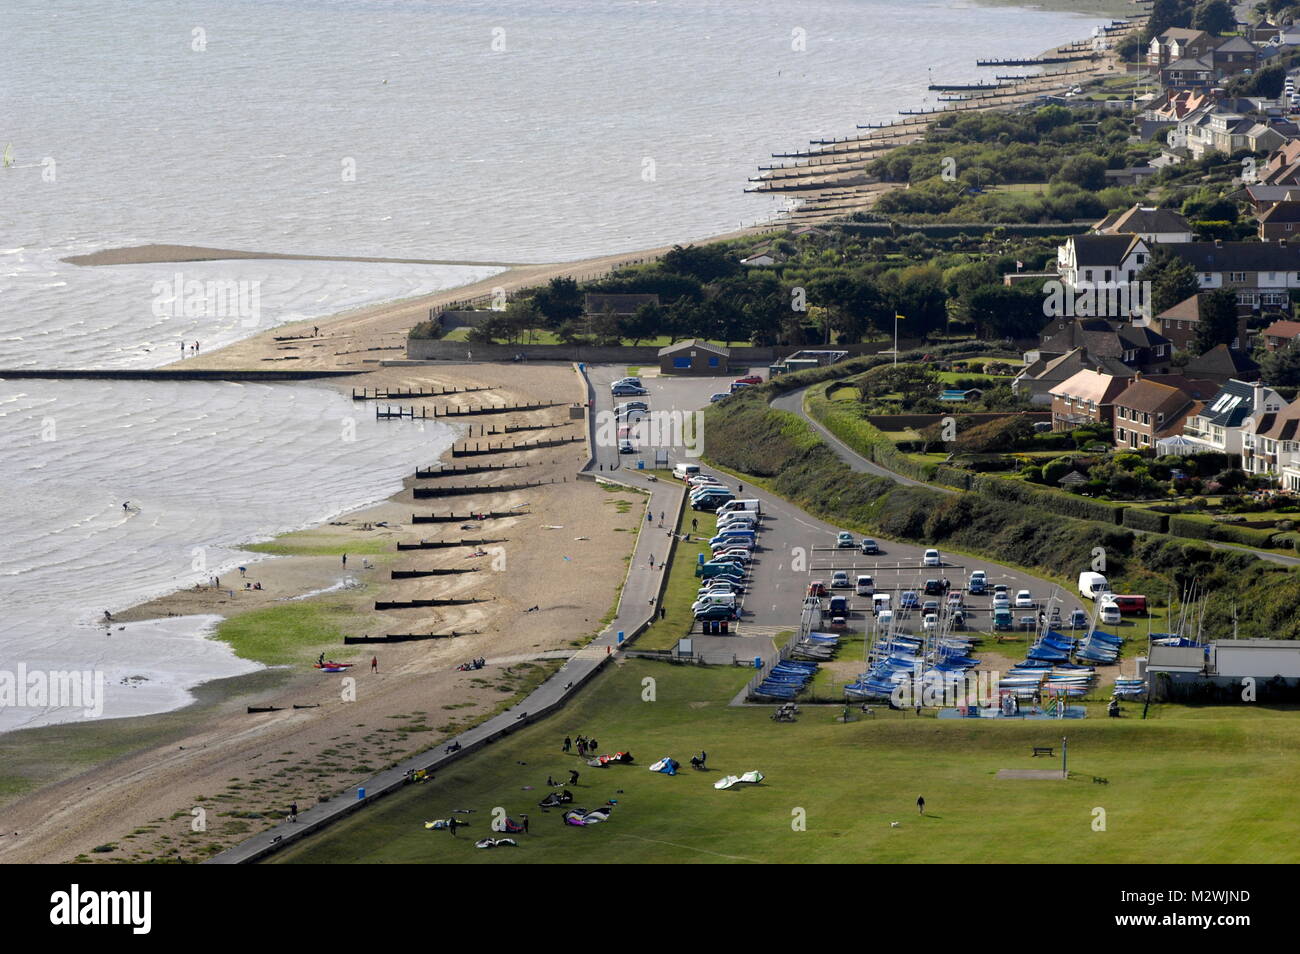 AJAXNETPHOTO. 24TH AUGUST, 2011. HILL HEAD, ENGLAND.  - AERIAL VIEW OF THE BEACH AND CAR PARK ON THE SOUTH COAST OVERLOOKING THE SOLENT. PHOTO:JONATHAN EASTLAND/AJAX REF:D2XS110209 1533 Stock Photo